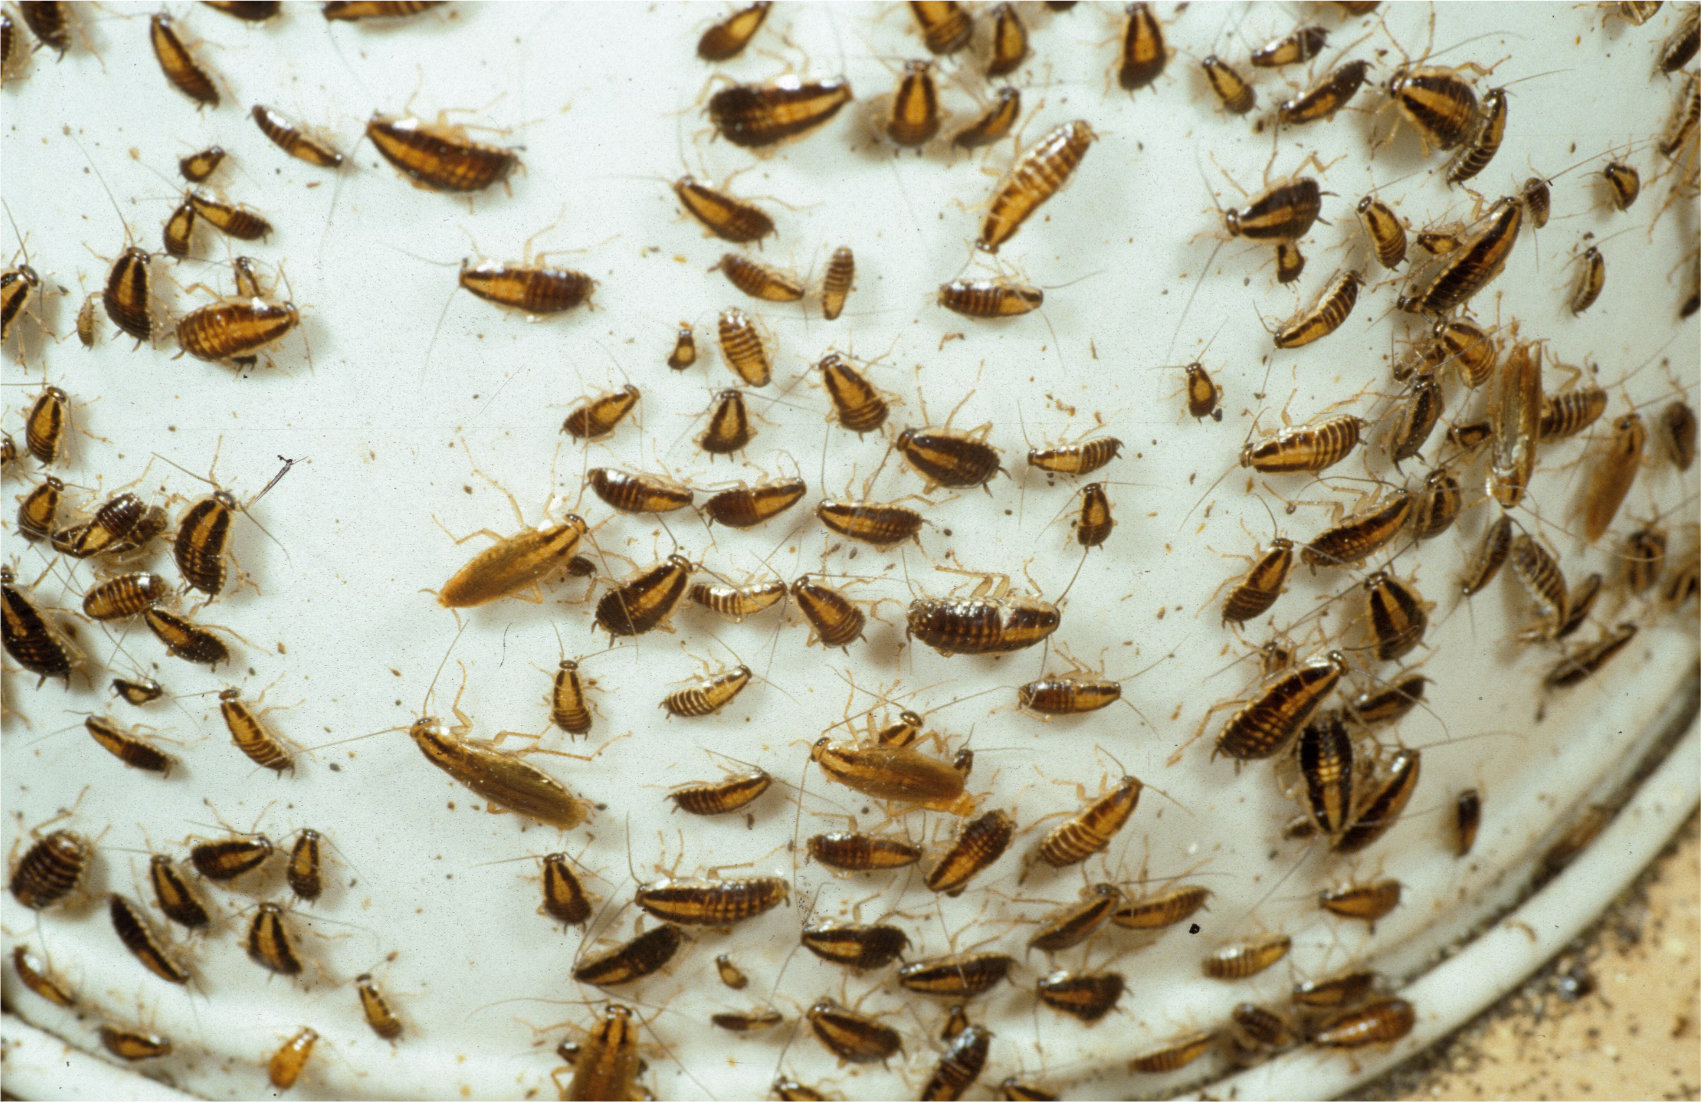 An image showing cockroach infestation